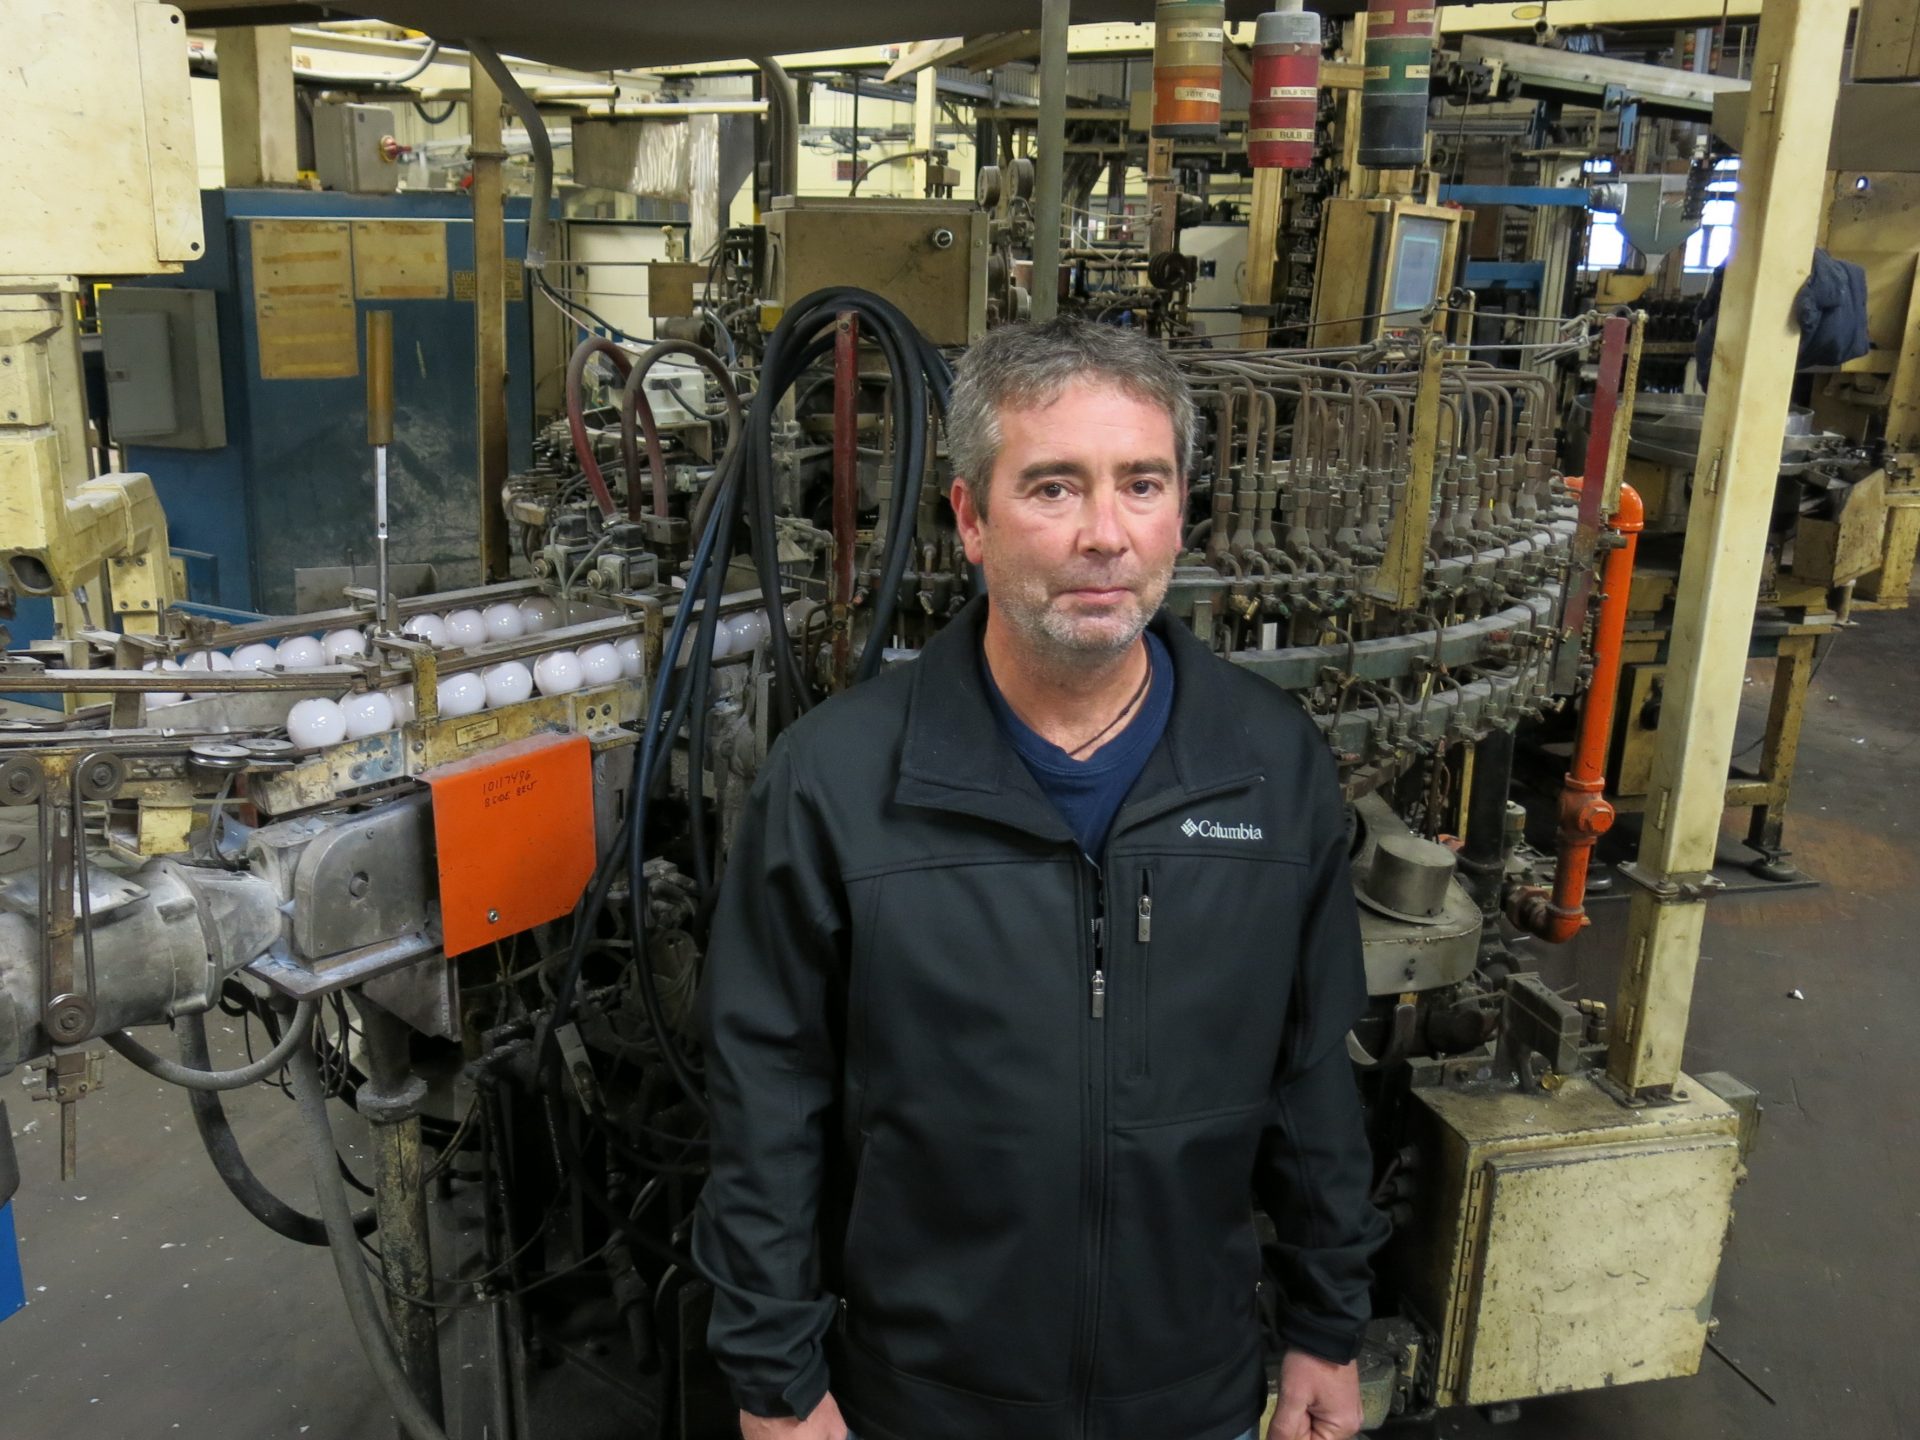 Jeff Anderson worked at the LEDVANCE lightbulb factory in St. Marys for more than 20 years. He is considering a career change to heavy equipment operator.